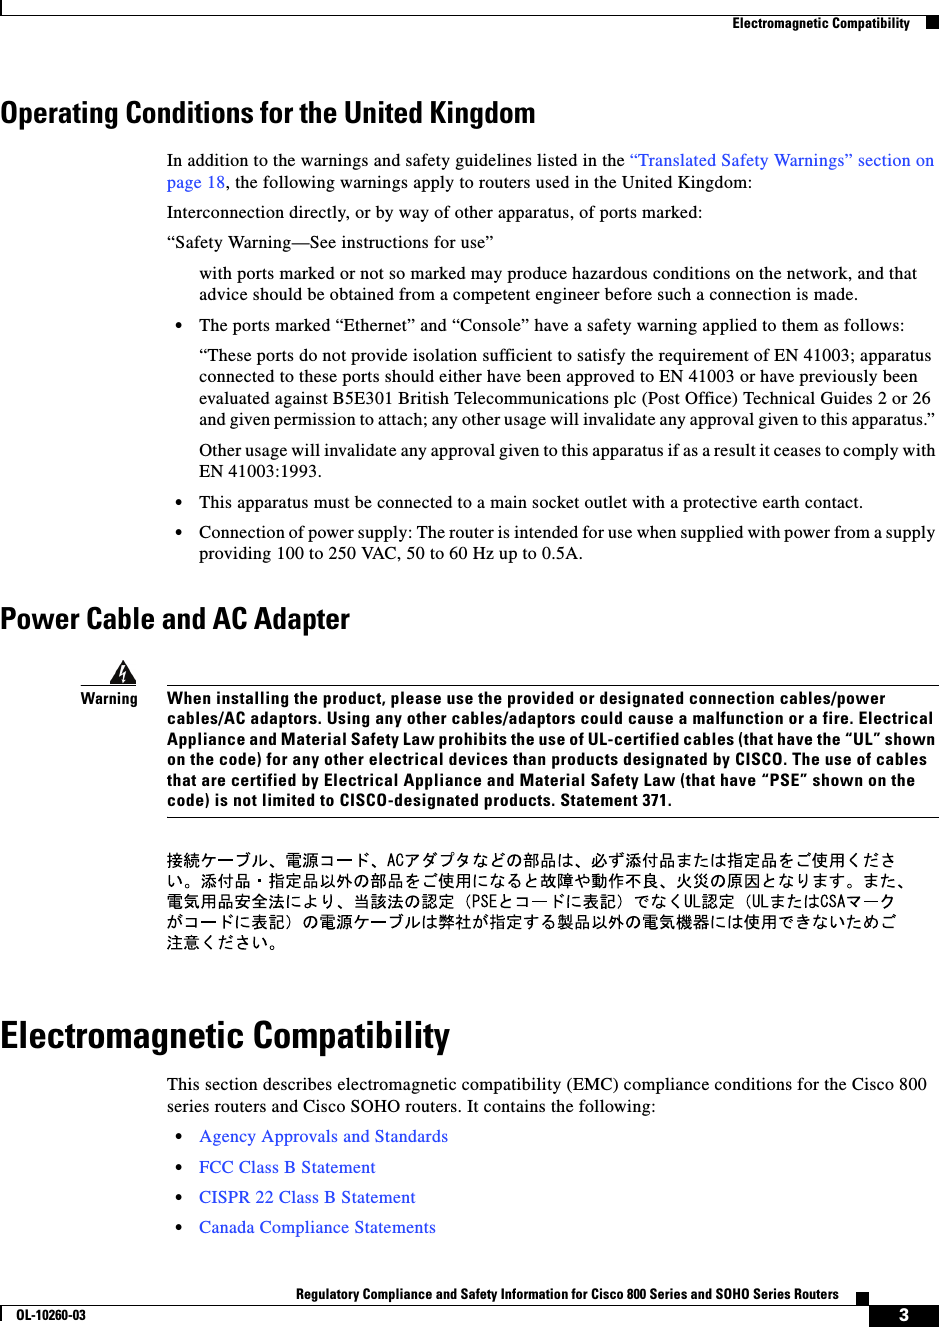  3Regulatory Compliance and Safety Information for Cisco 800 Series and SOHO Series RoutersOL-10260-03  Electromagnetic CompatibilityOperating Conditions for the United KingdomIn addition to the warnings and safety guidelines listed in the “Translated Safety Warnings” section on page 18, the following warnings apply to routers used in the United Kingdom:Interconnection directly, or by way of other apparatus, of ports marked:“Safety Warning—See instructions for use” with ports marked or not so marked may produce hazardous conditions on the network, and that advice should be obtained from a competent engineer before such a connection is made. •The ports marked “Ethernet” and “Console” have a safety warning applied to them as follows:“These ports do not provide isolation sufficient to satisfy the requirement of EN 41003; apparatus connected to these ports should either have been approved to EN 41003 or have previously been evaluated against B5E301 British Telecommunications plc (Post Office) Technical Guides 2 or 26 and given permission to attach; any other usage will invalidate any approval given to this apparatus.” Other usage will invalidate any approval given to this apparatus if as a result it ceases to comply with EN 41003:1993. •This apparatus must be connected to a main socket outlet with a protective earth contact.•Connection of power supply: The router is intended for use when supplied with power from a supply providing 100 to 250 VAC, 50 to 60 Hz up to 0.5A.Power Cable and AC AdapterWarningWhen installing the product, please use the provided or designated connection cables/power cables/AC adaptors. Using any other cables/adaptors could cause a malfunction or a fire. Electrical Appliance and Material Safety Law prohibits the use of UL-certified cables (that have the “UL” shown on the code) for any other electrical devices than products designated by CISCO. The use of cables that are certified by Electrical Appliance and Material Safety Law (that have “PSE” shown on the code) is not limited to CISCO-designated products. Statement 371.Electromagnetic CompatibilityThis section describes electromagnetic compatibility (EMC) compliance conditions for the Cisco 800 series routers and Cisco SOHO routers. It contains the following:•Agency Approvals and Standards•FCC Class B Statement•CISPR 22 Class B Statement•Canada Compliance Statements